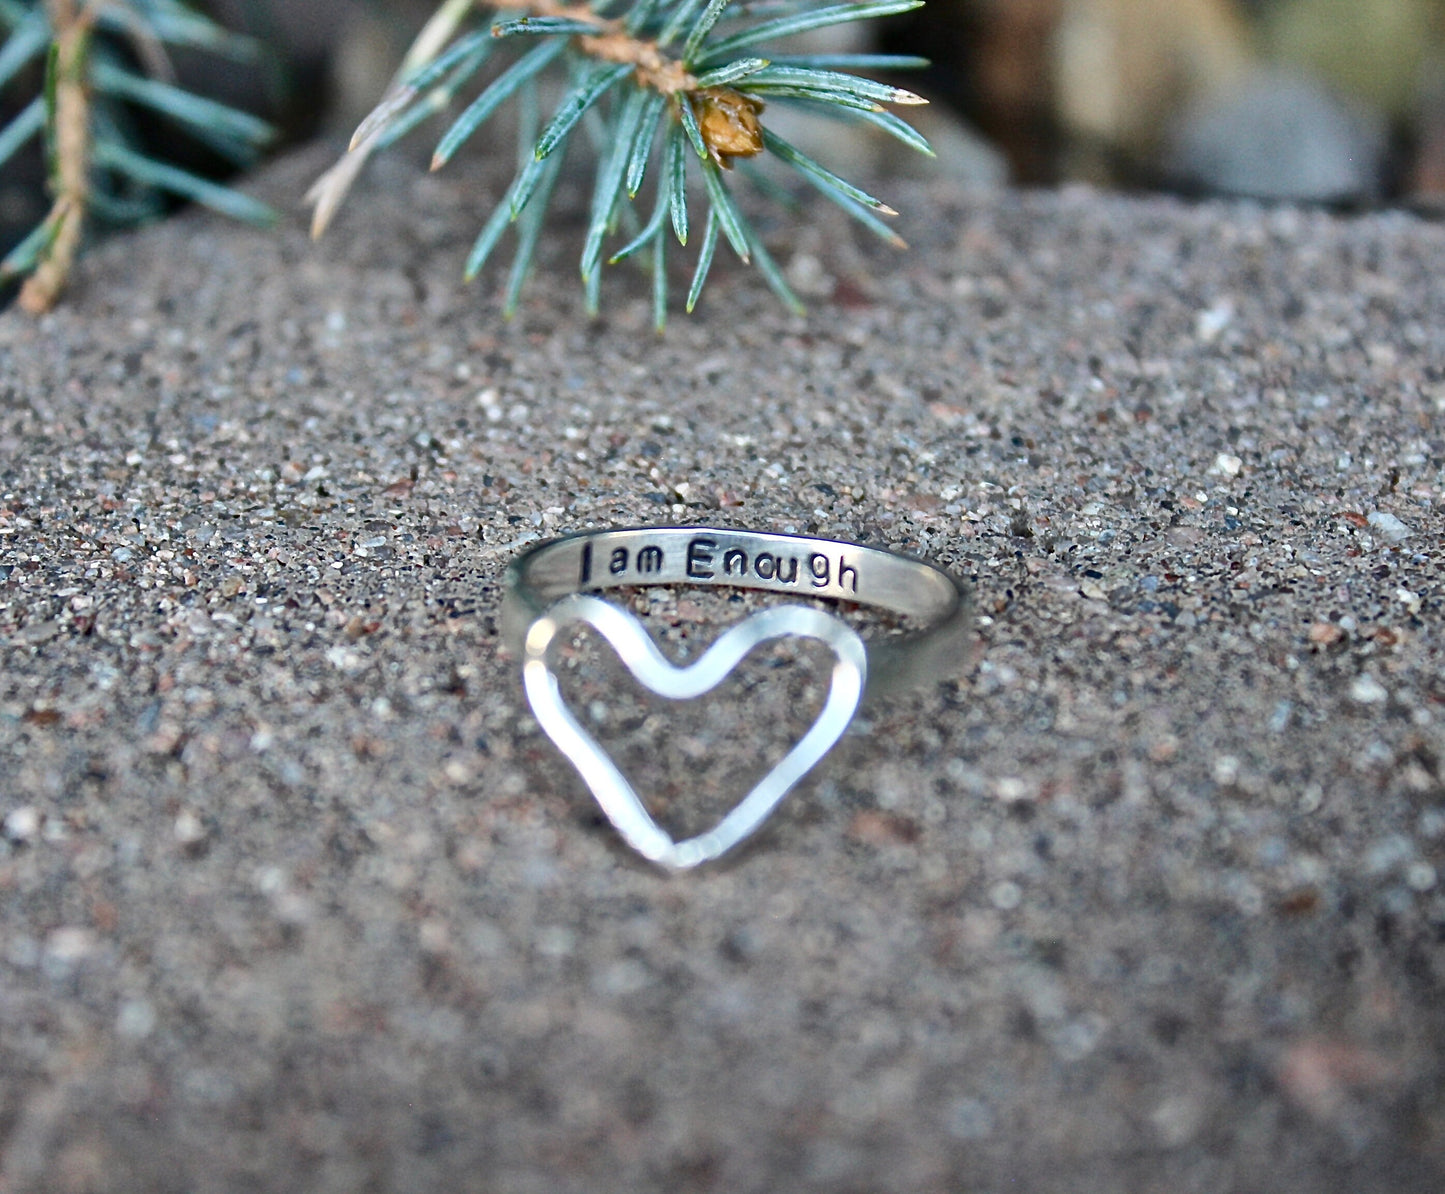 I am Enough Heart Ring In Solid Sterling Silver